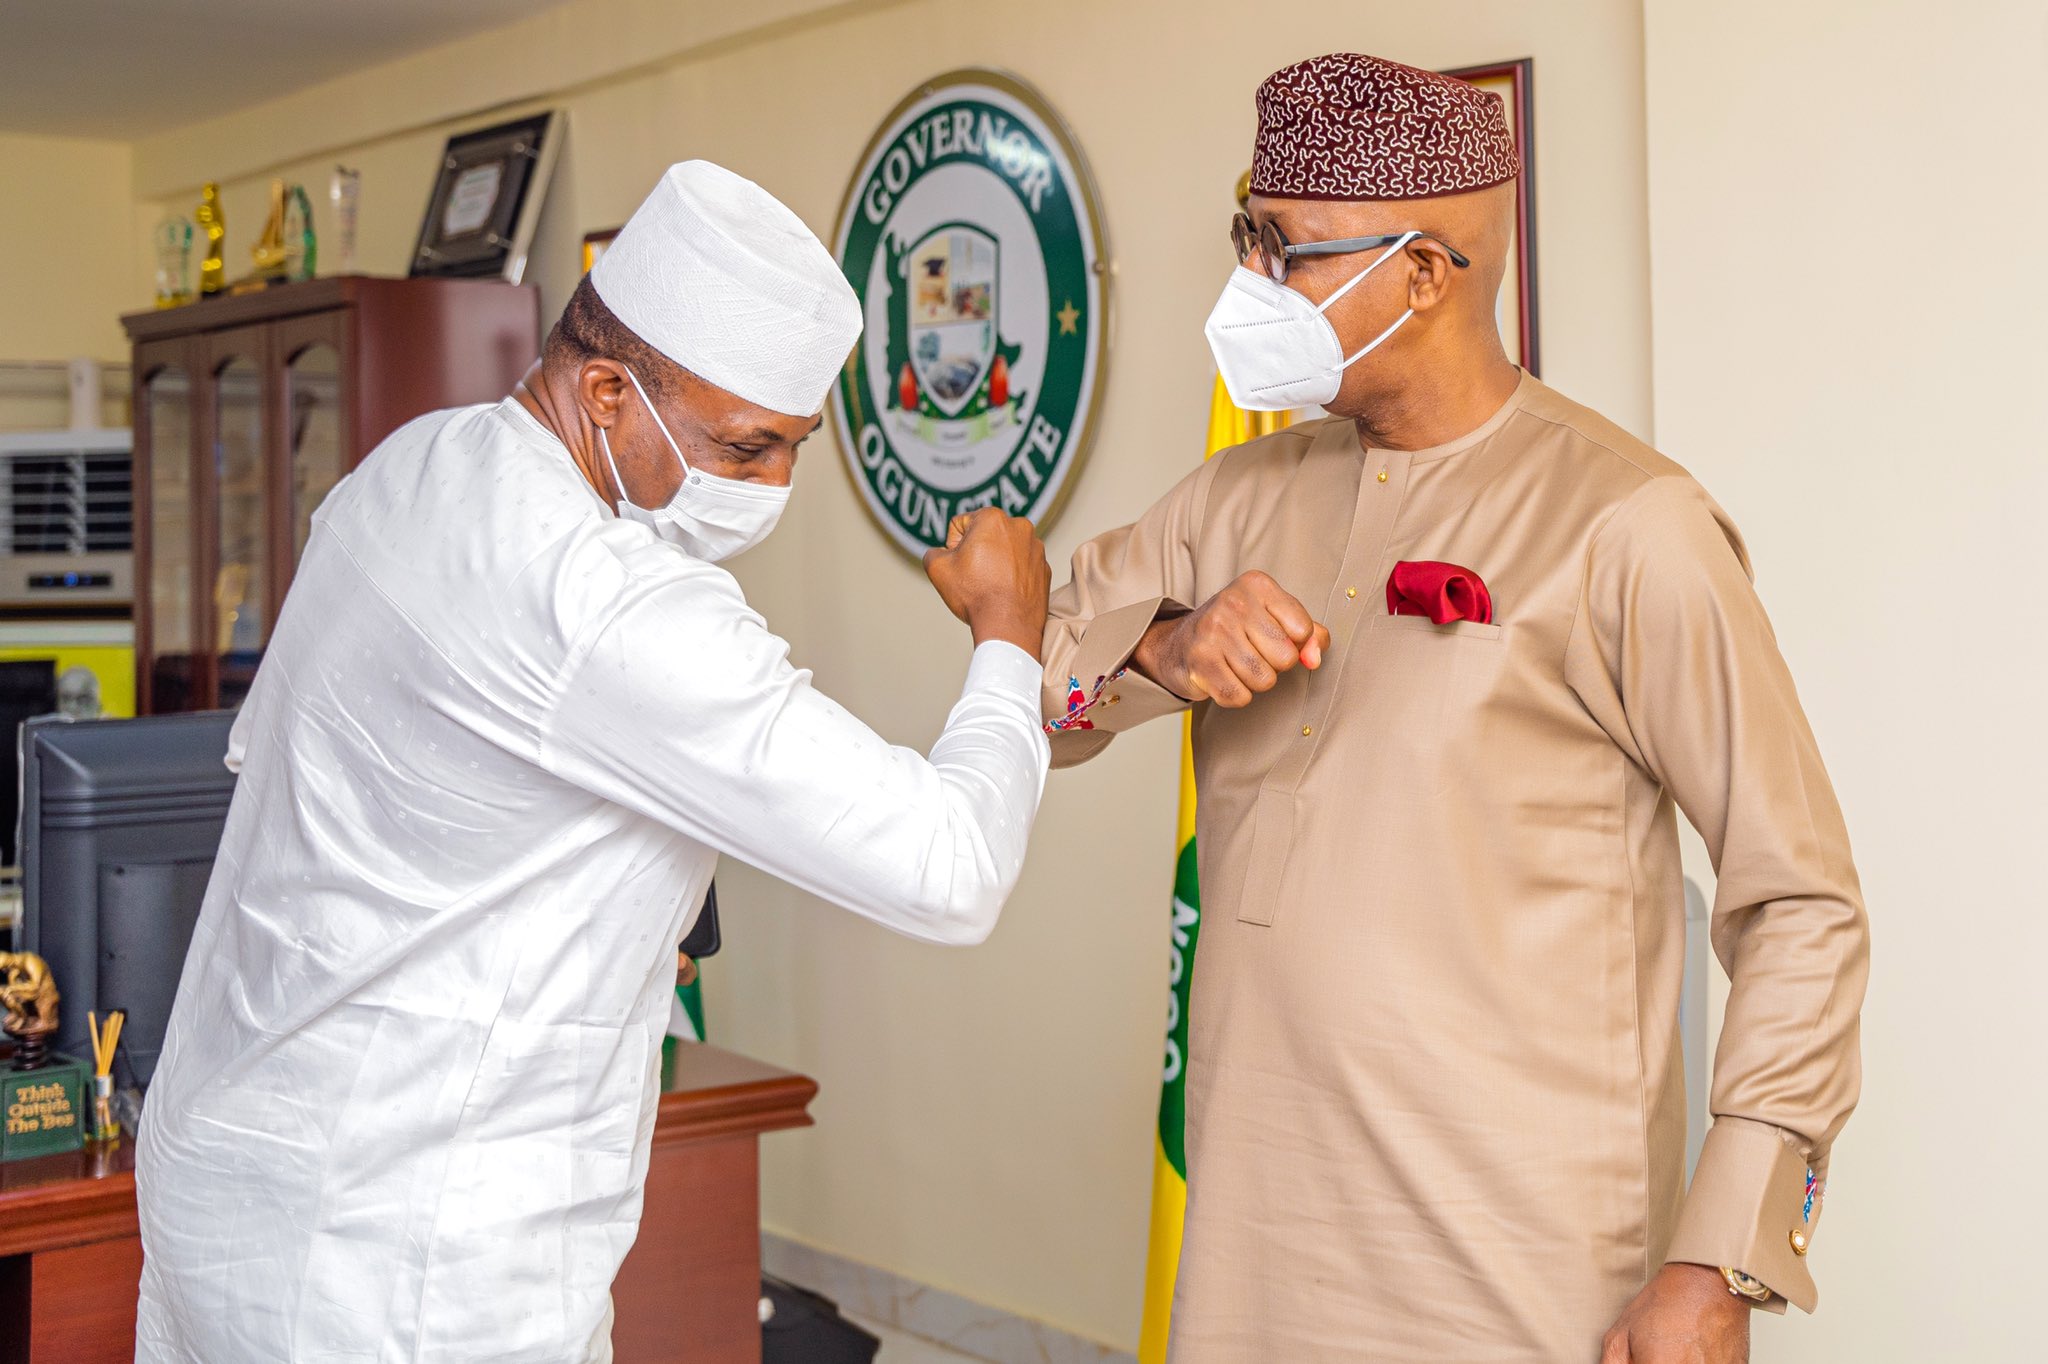 Governor Dapo Abiodun received the former speaker of the House of Representatives, Dimeji Bankole, in his office.